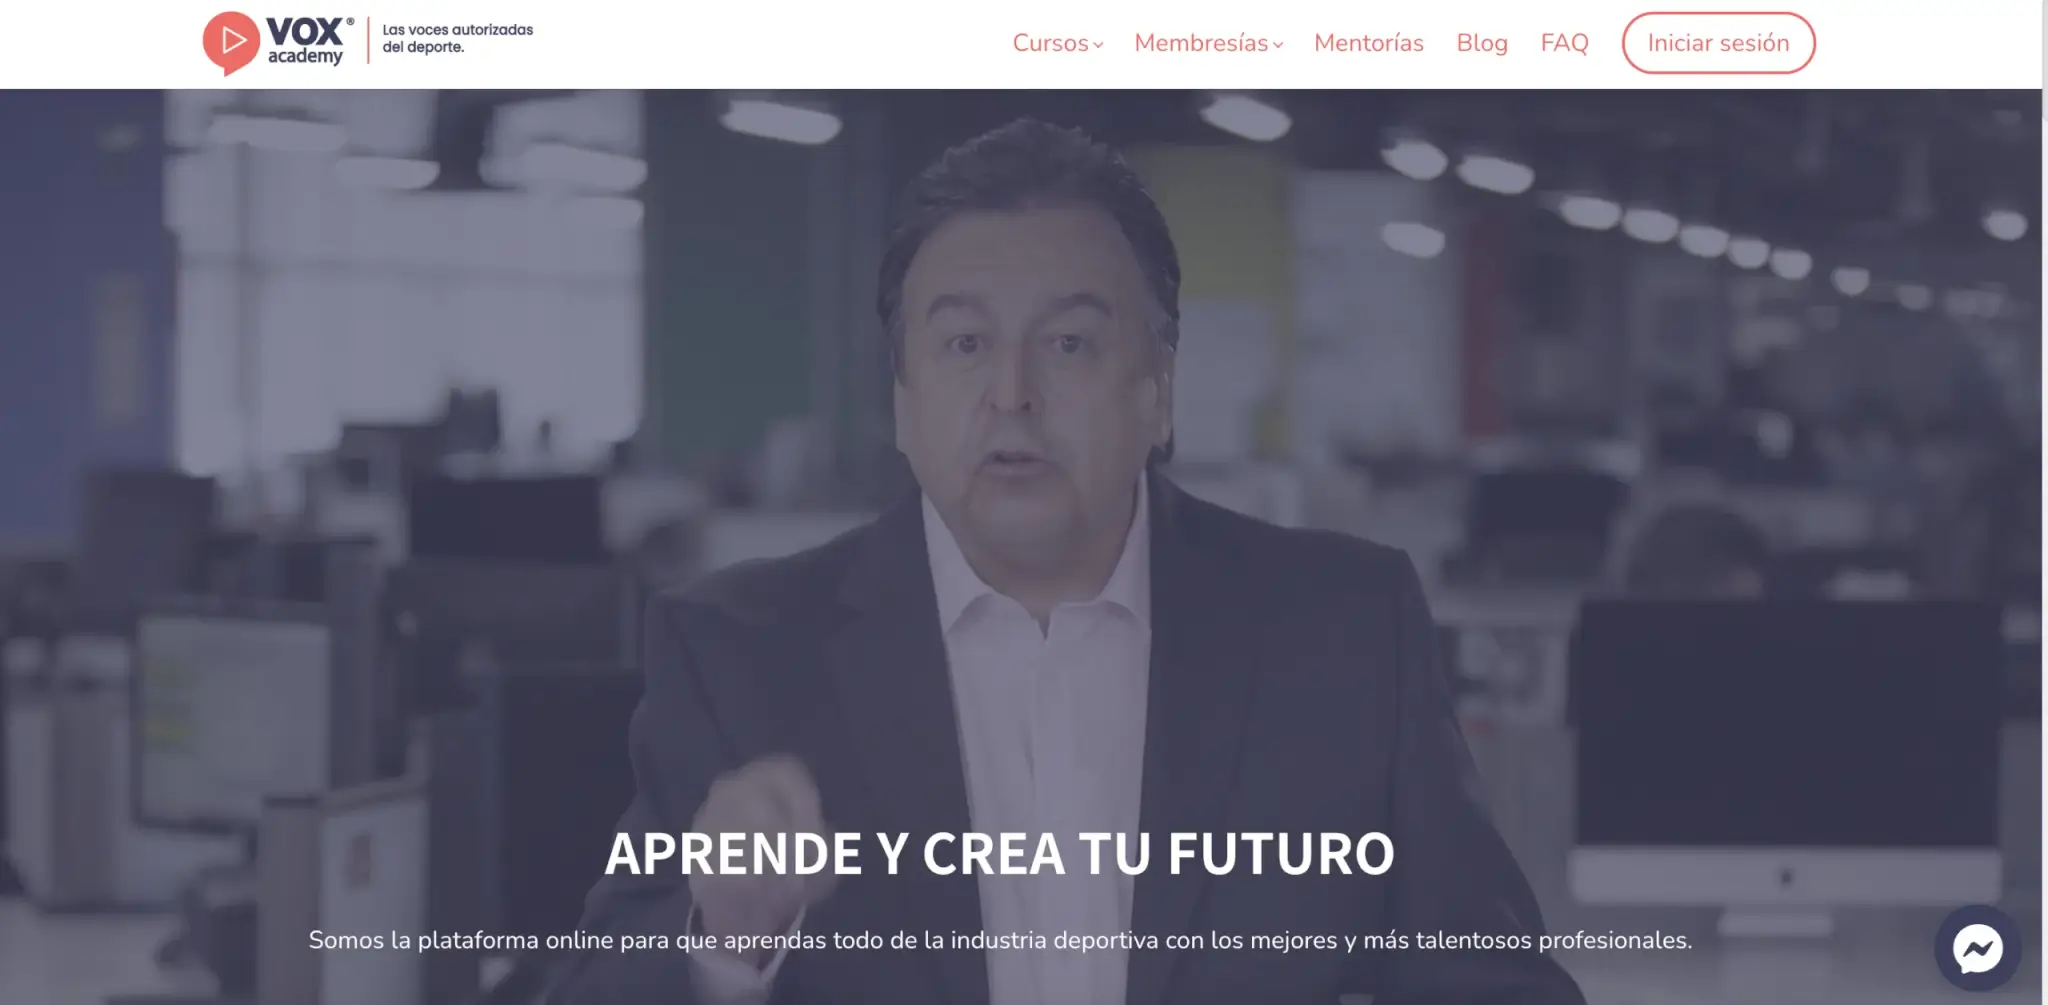 a screenshot of the VOX Academy landing page showing a man talking